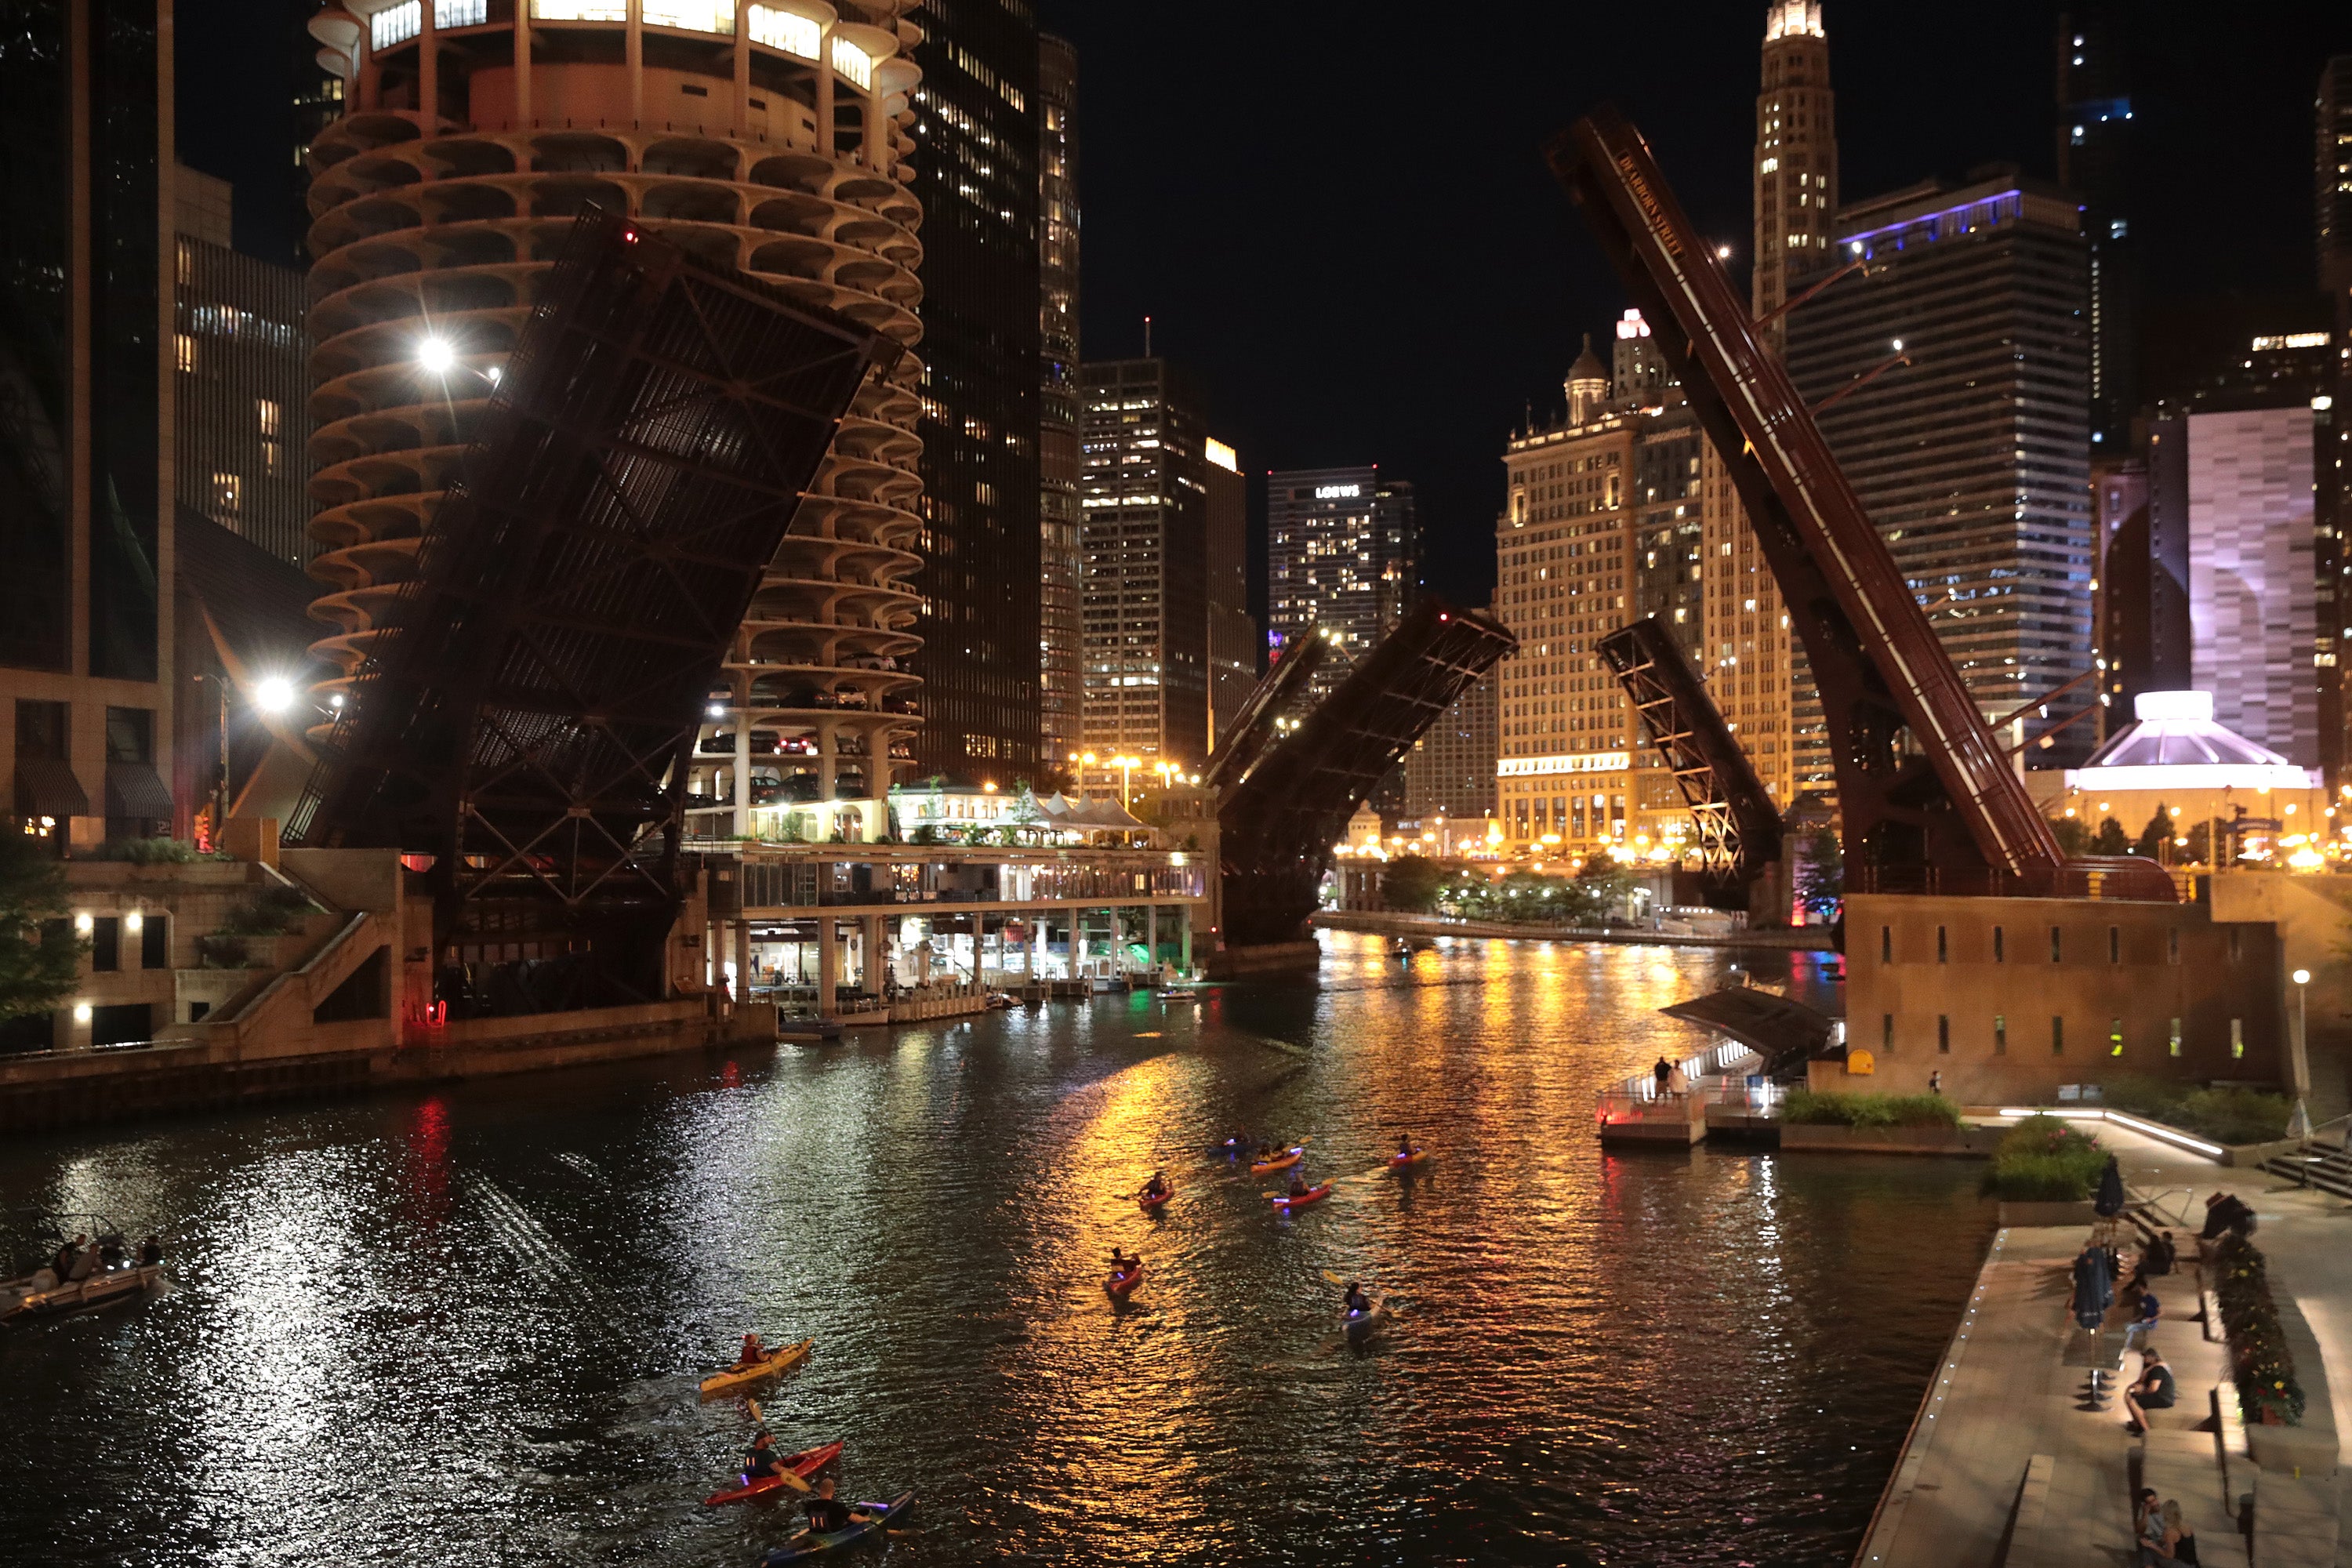 The Chicago River. A new study from online home brokerage firm Redfin found that in cities across the US, neighbourhoods segregated via “red-lining” face increased climate change risk.